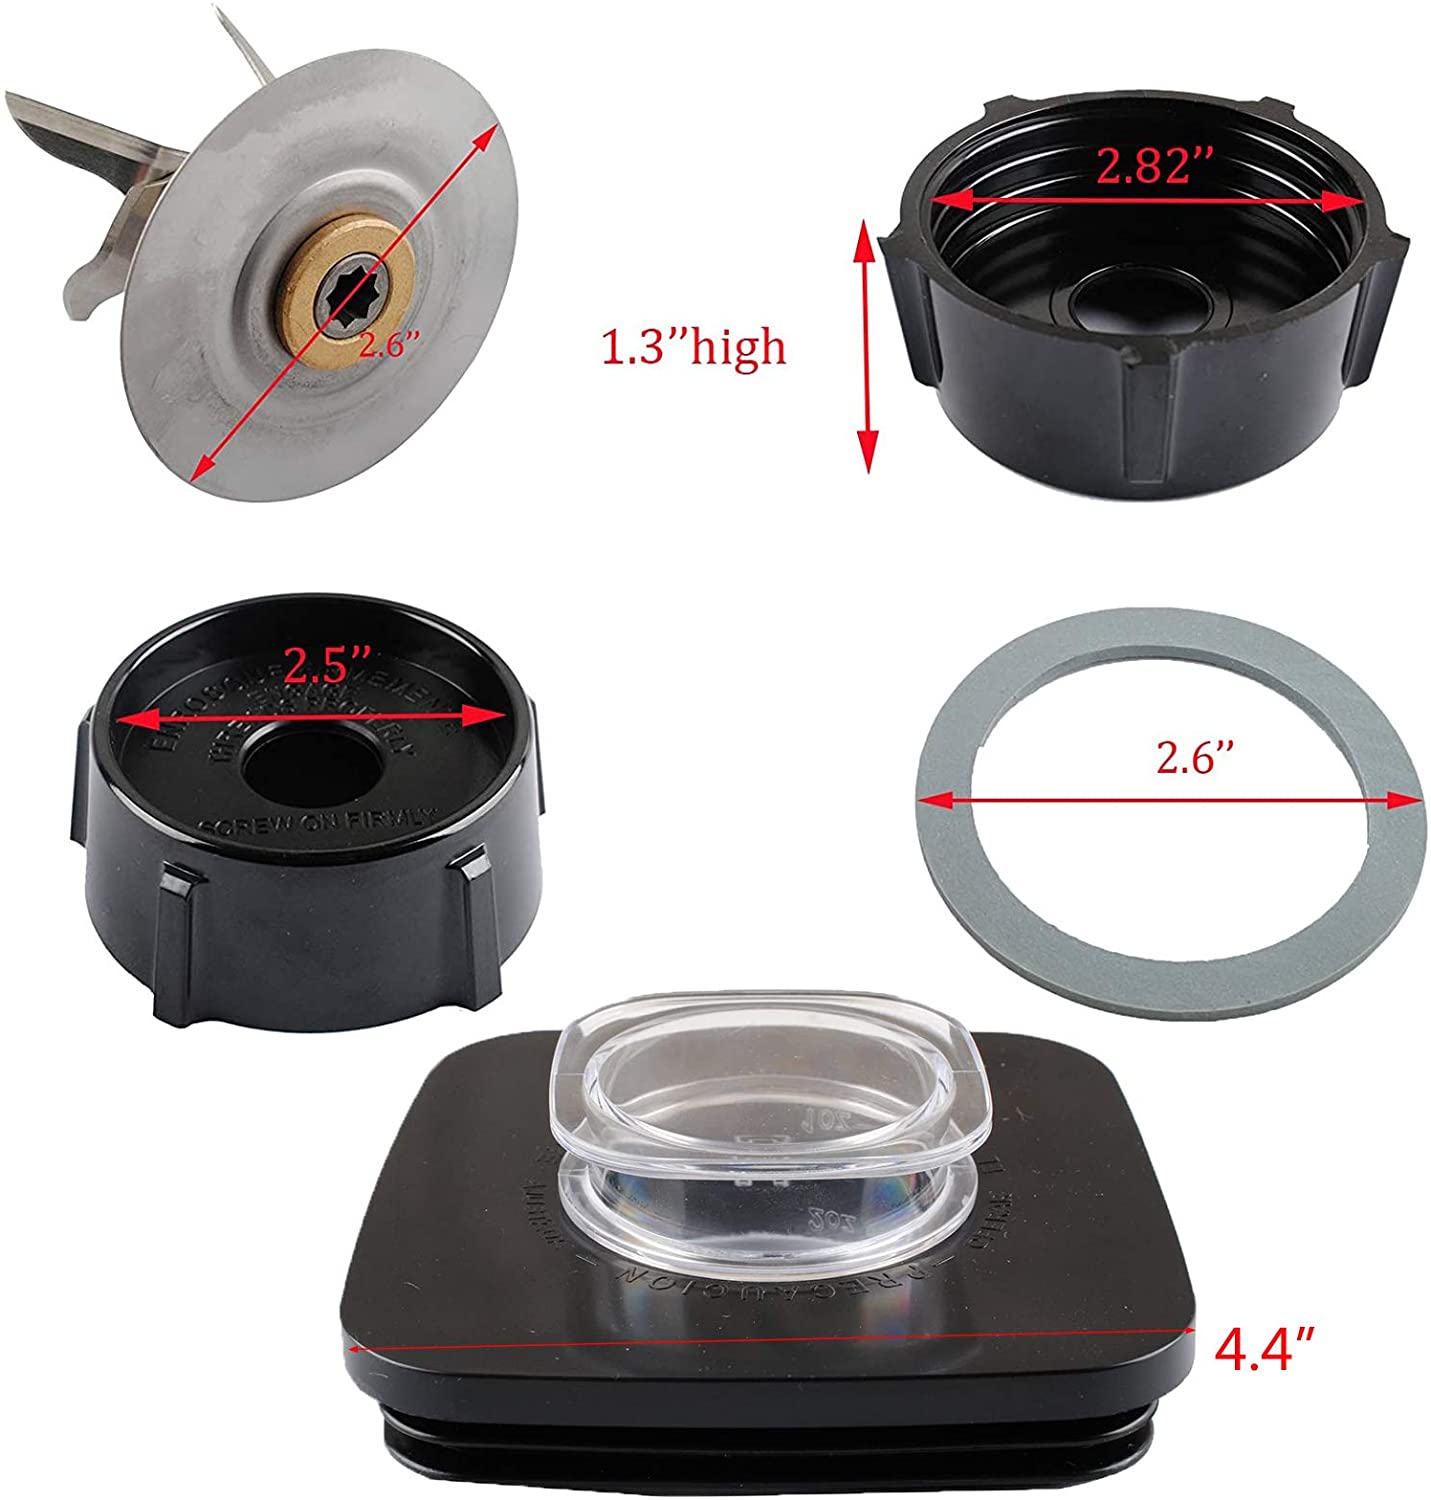 Wadoy 4961 Ice Blade for Oster Blender Accessory Refresh Kit - Glass Lid 4903, Bottom Cap 4902 with Seals Blender Replacement Parts for Easter